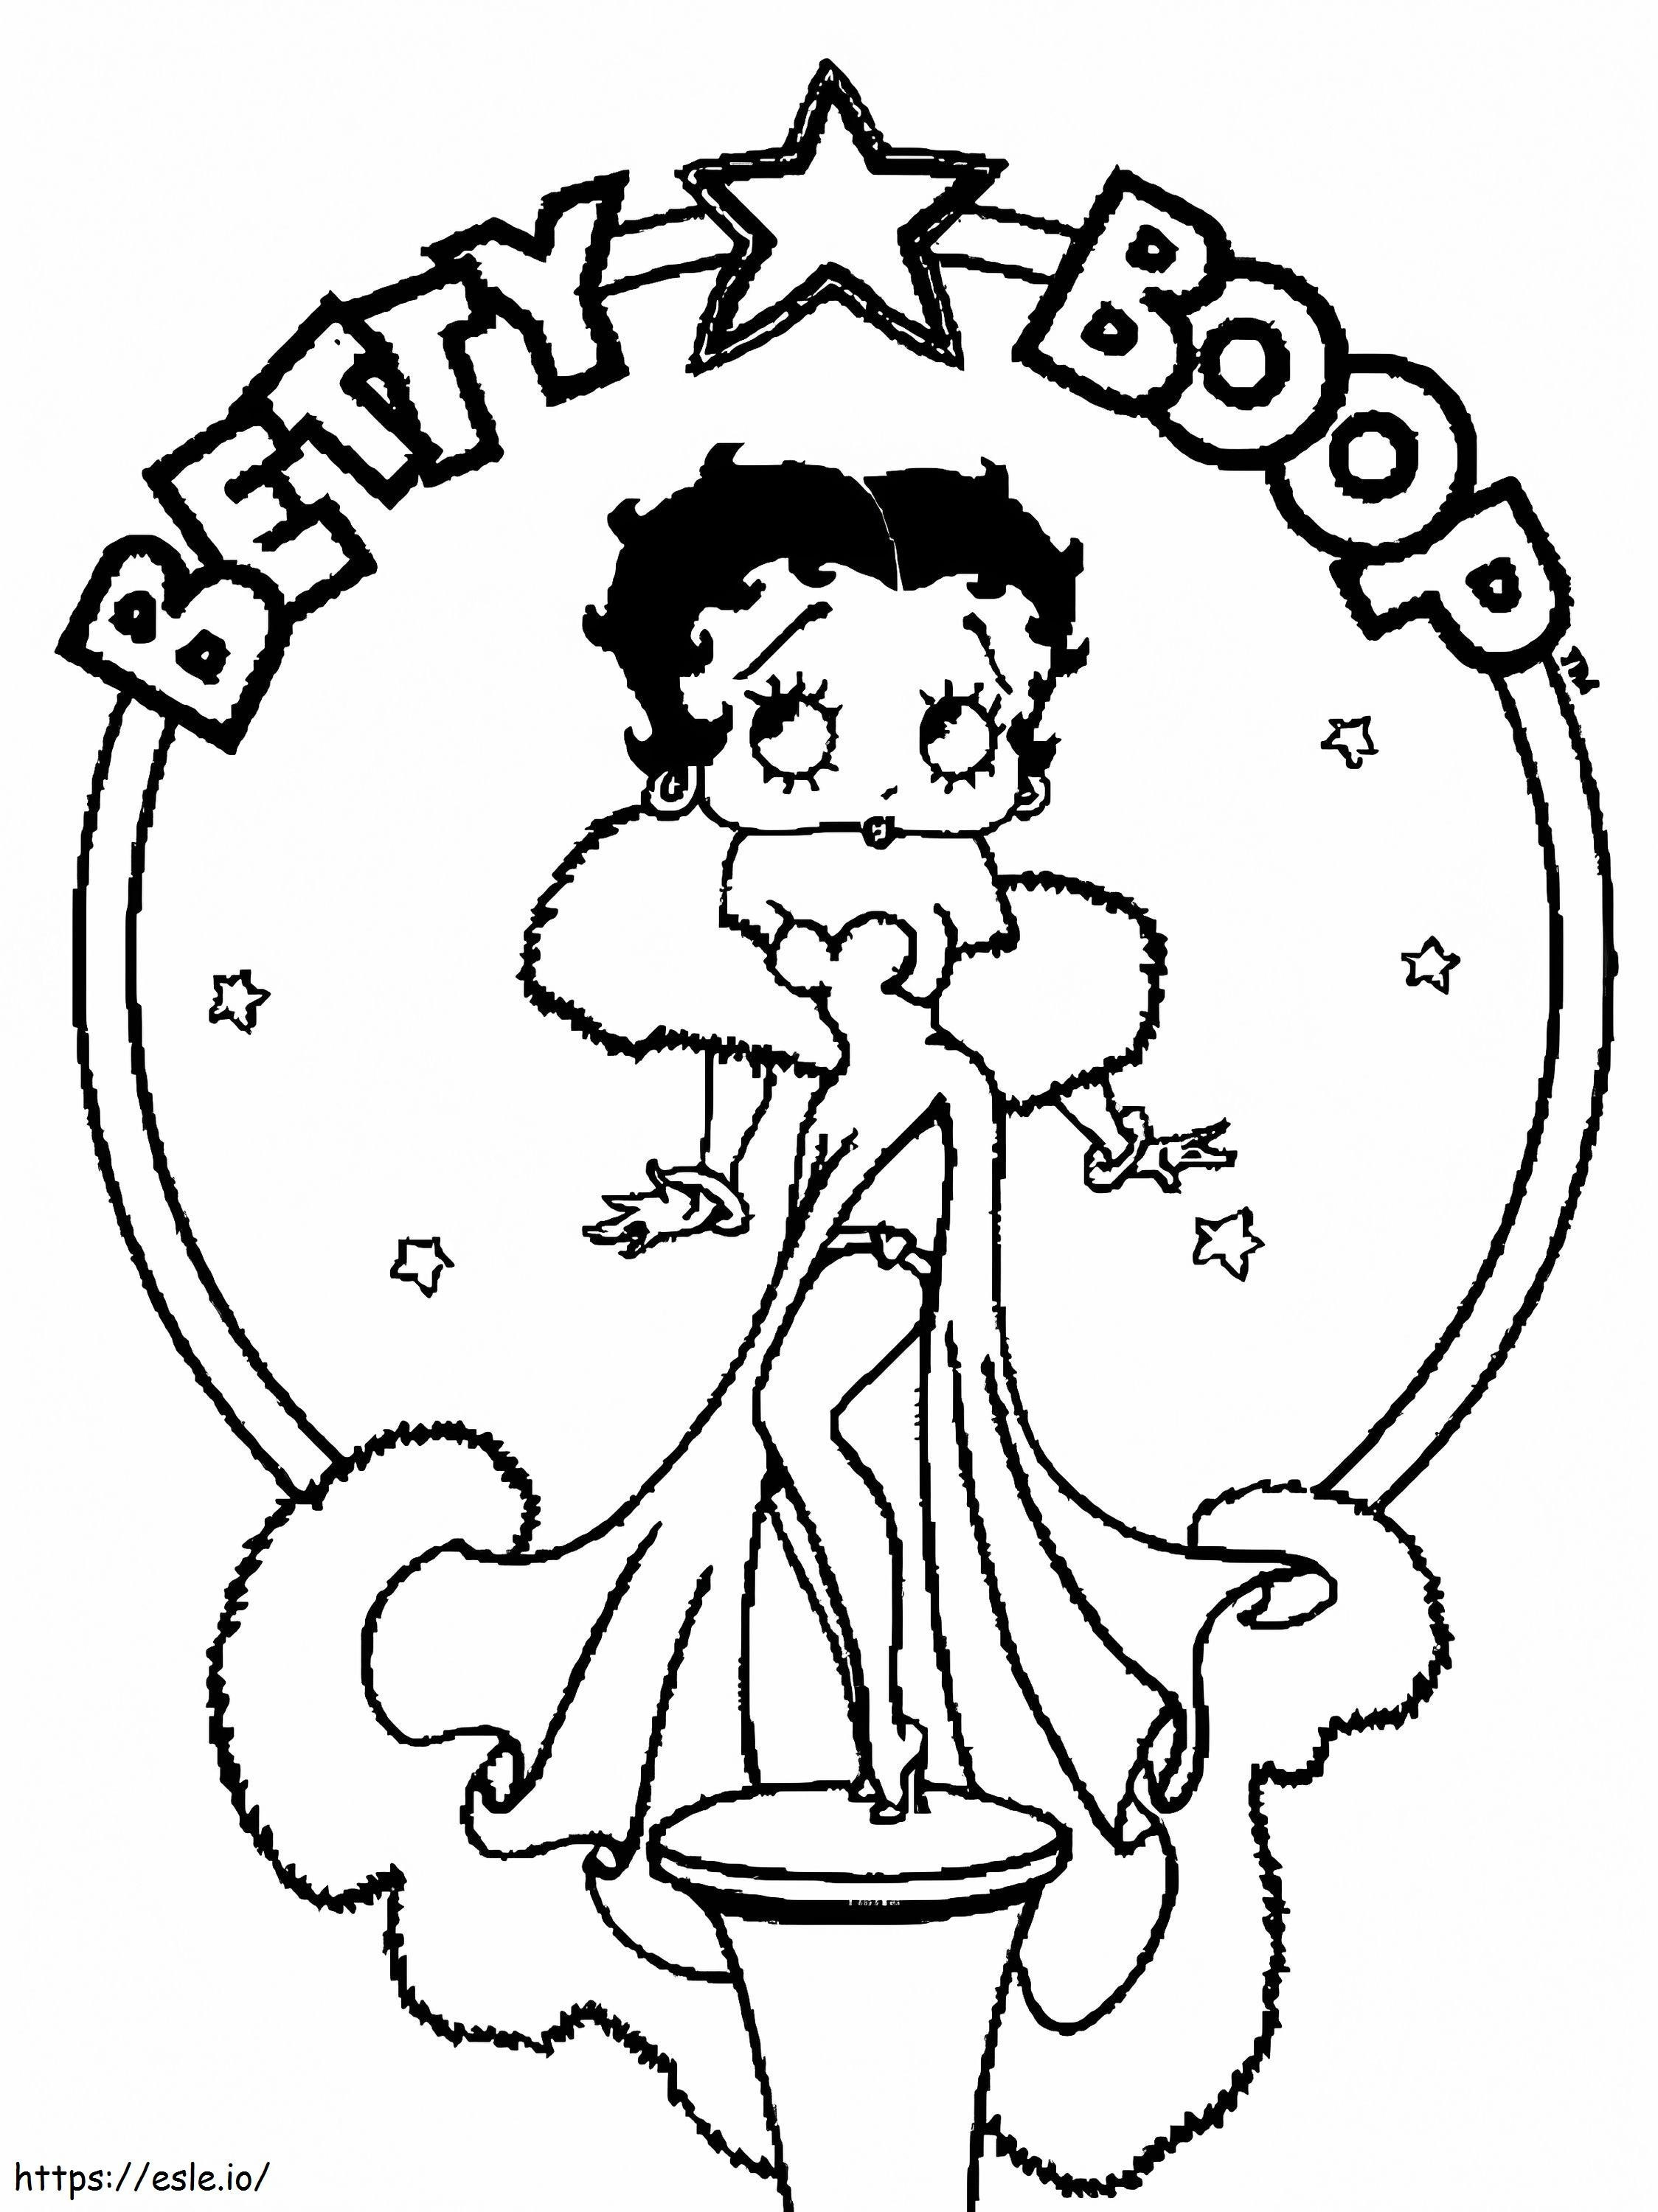 Star Betty Boop coloring page